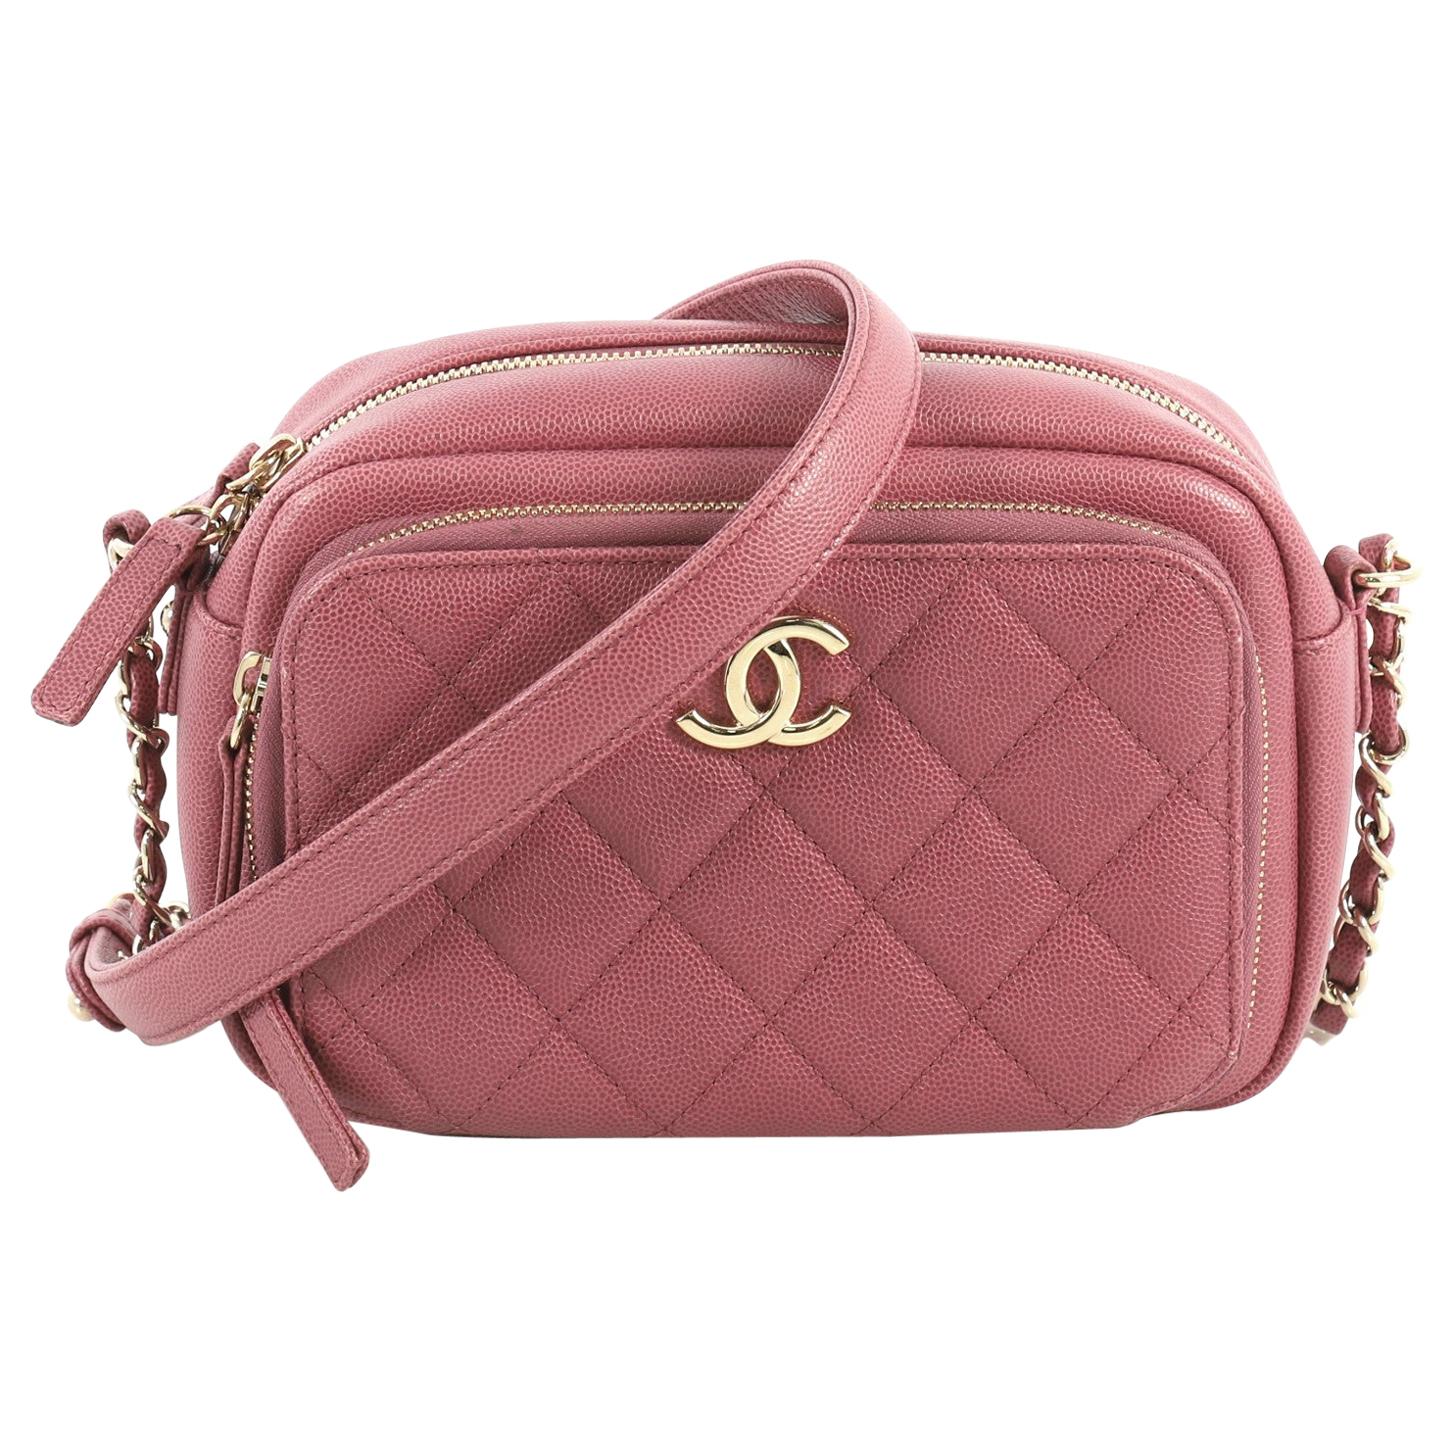 Chanel Business Affinity Camera Case Bag Quilted Caviar Small